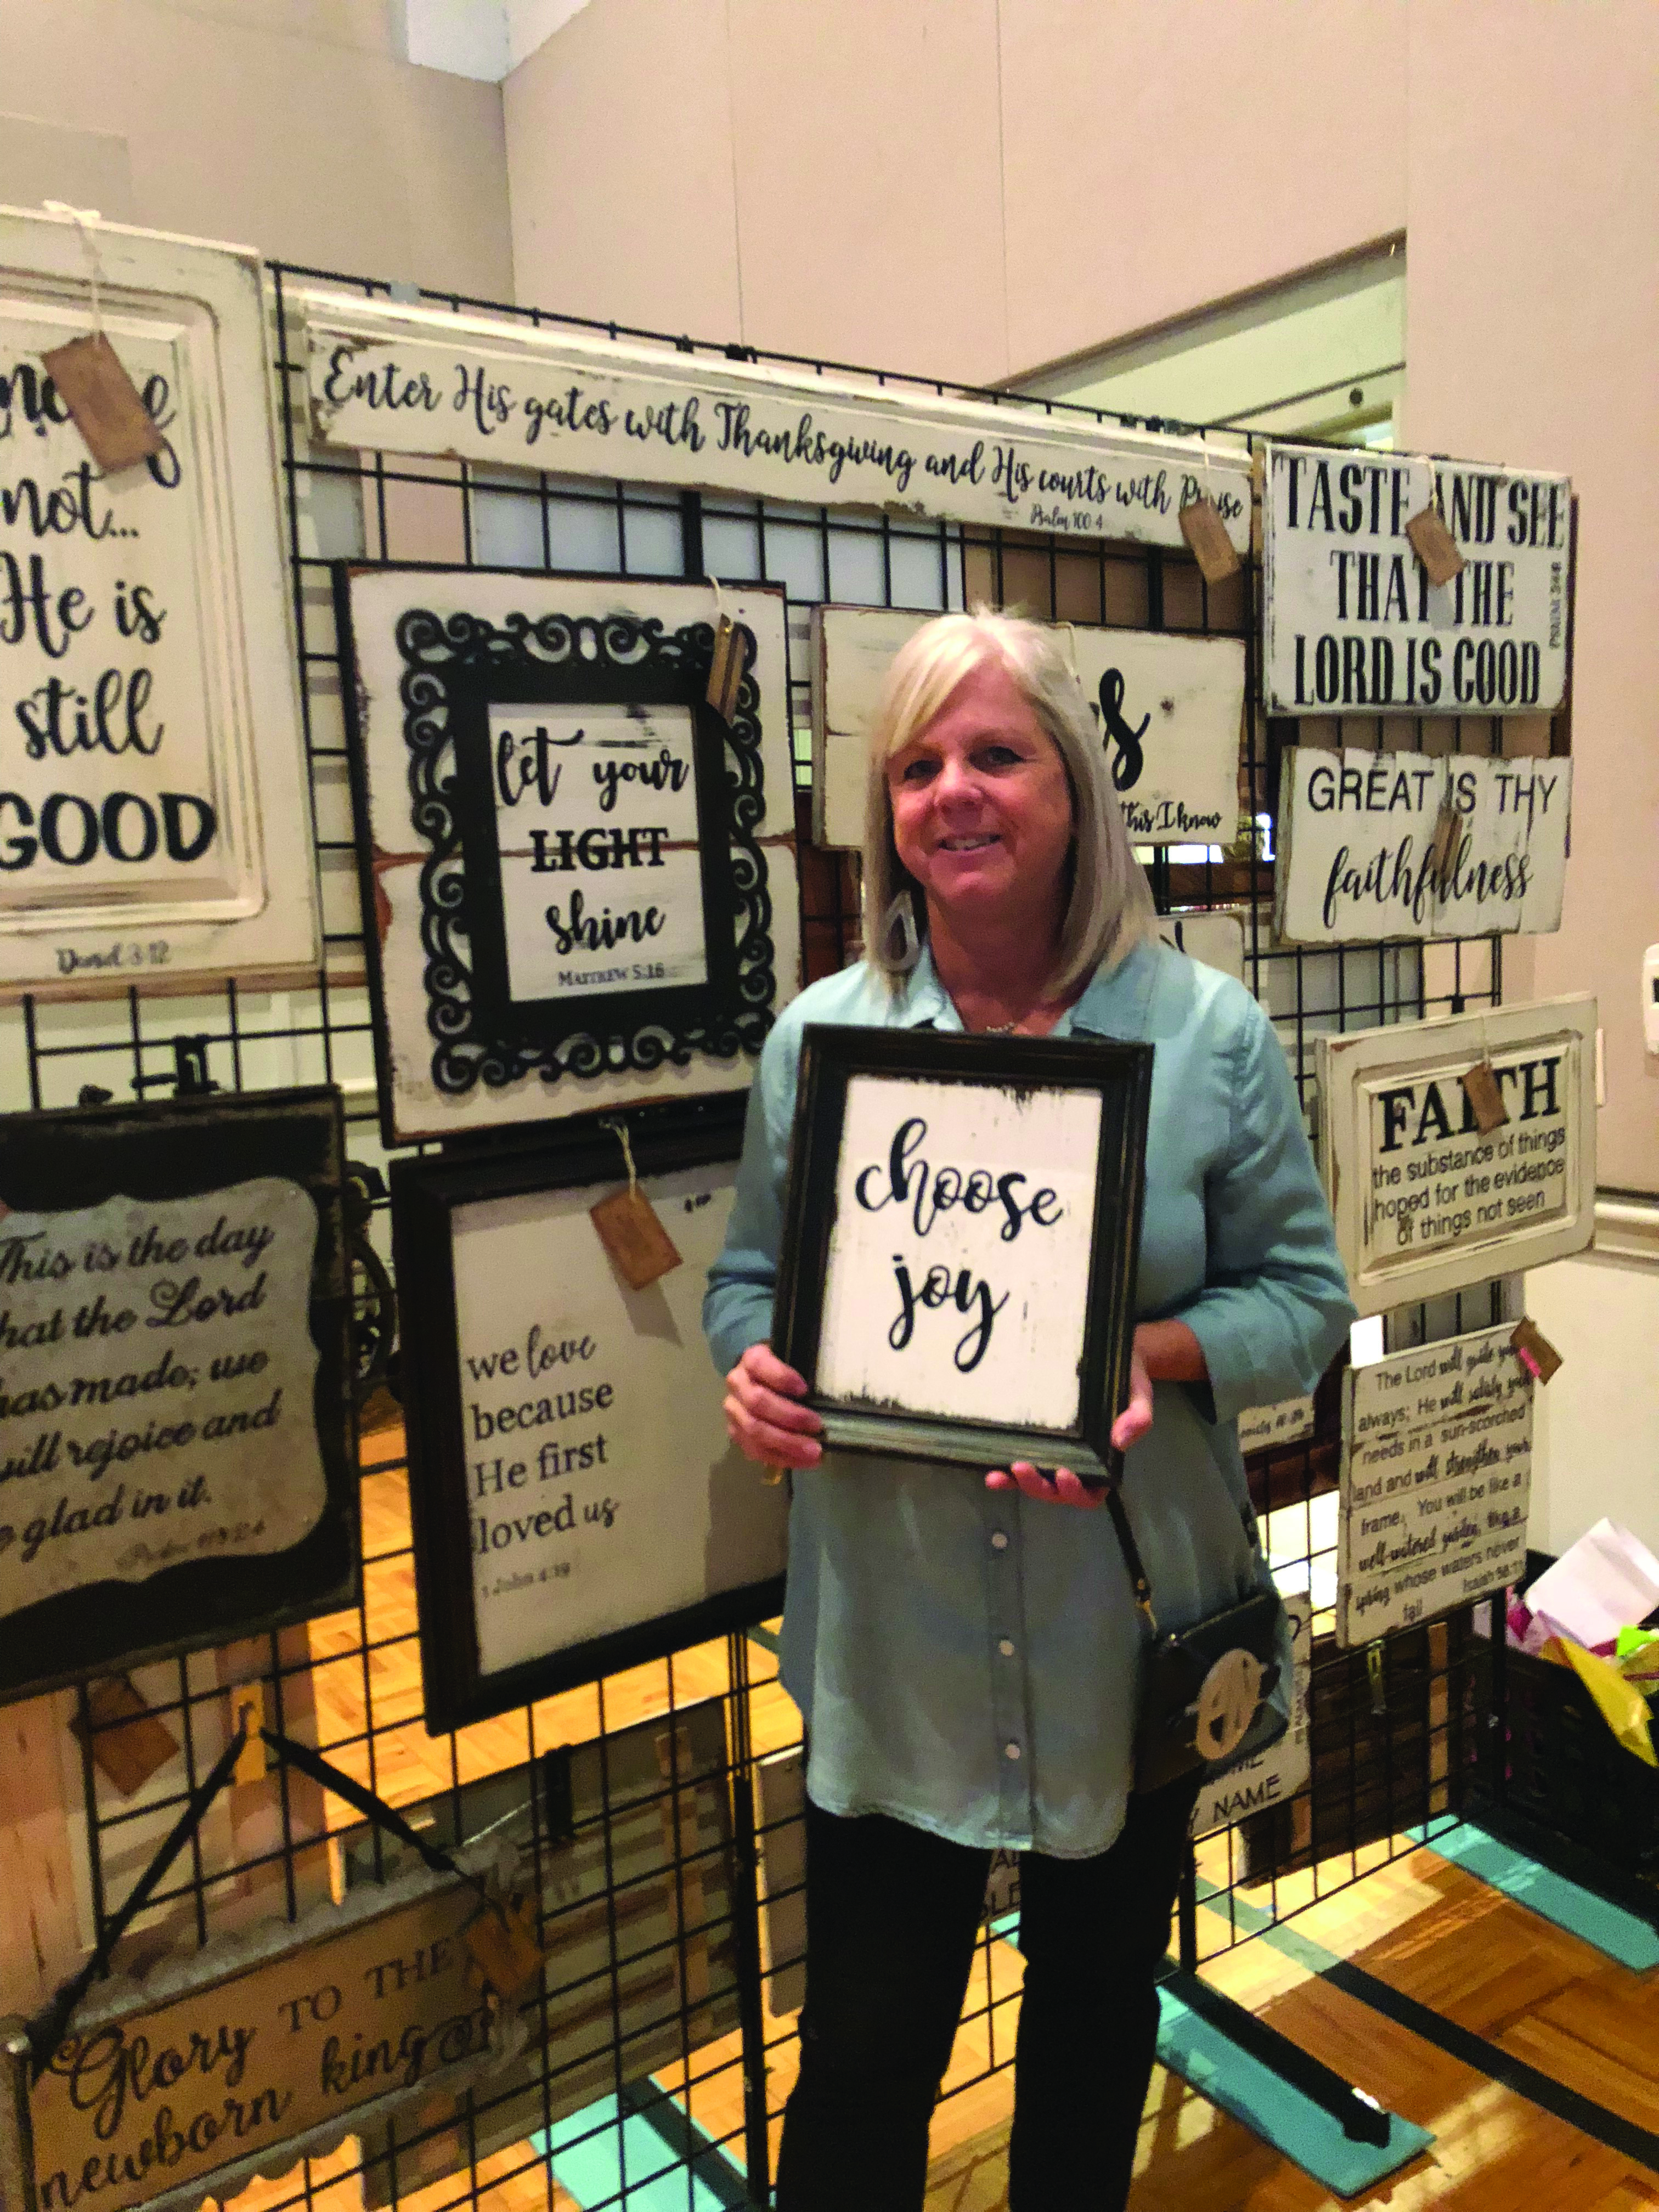 SHOPPING…With A Purpose  By Stacy Kivett